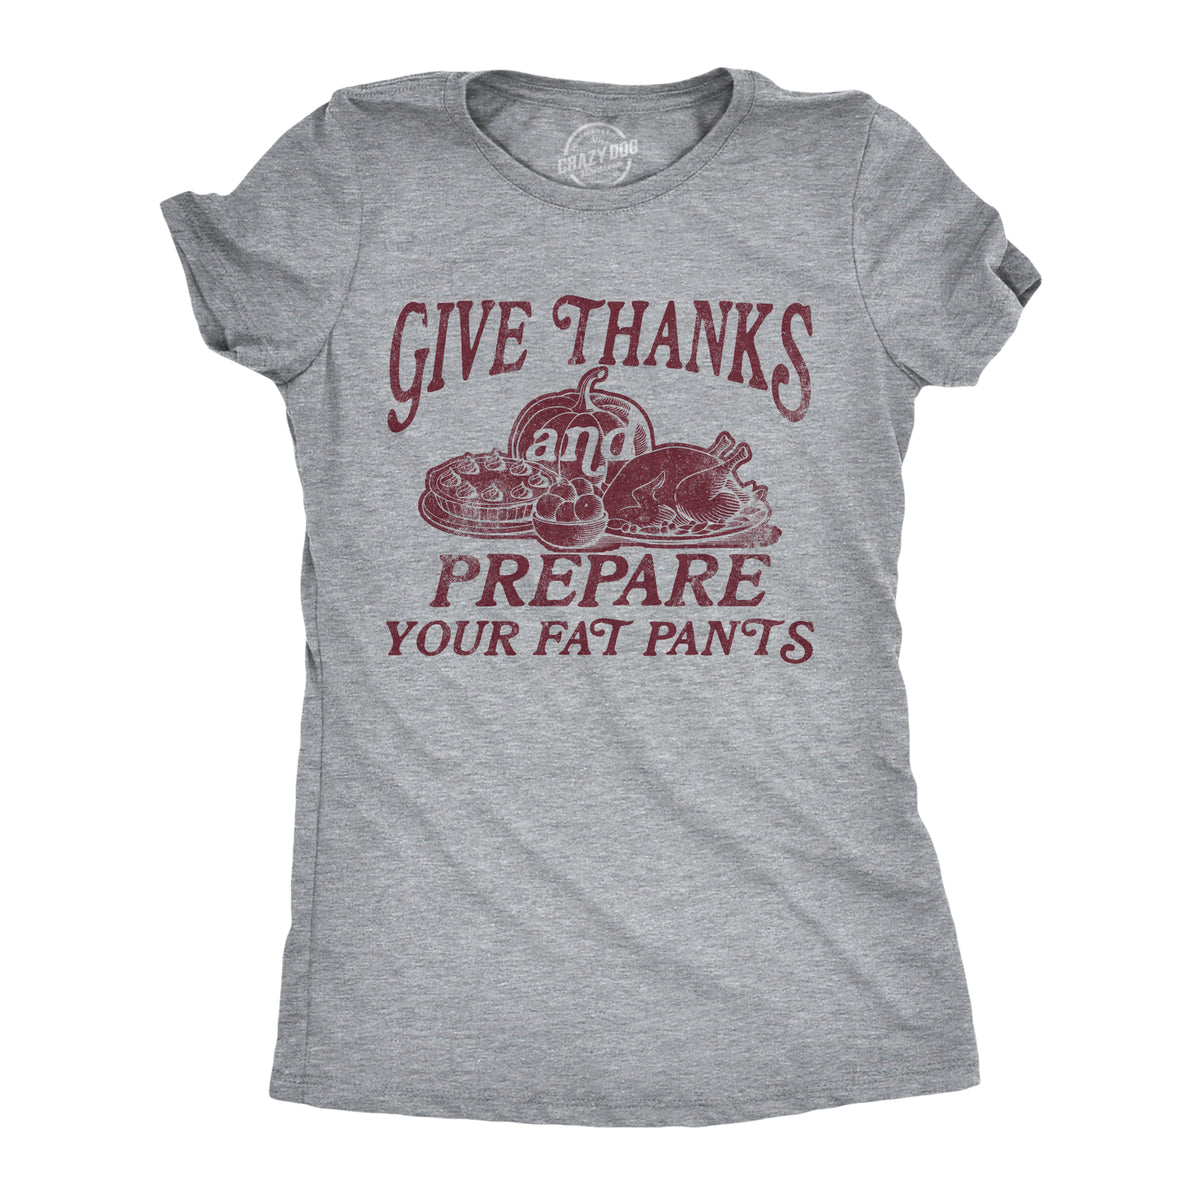 Funny Light Heather Grey - THANKS Give Thanks And Prepare Your Fat Pants Womens T Shirt Nerdy Thanksgiving Food Tee